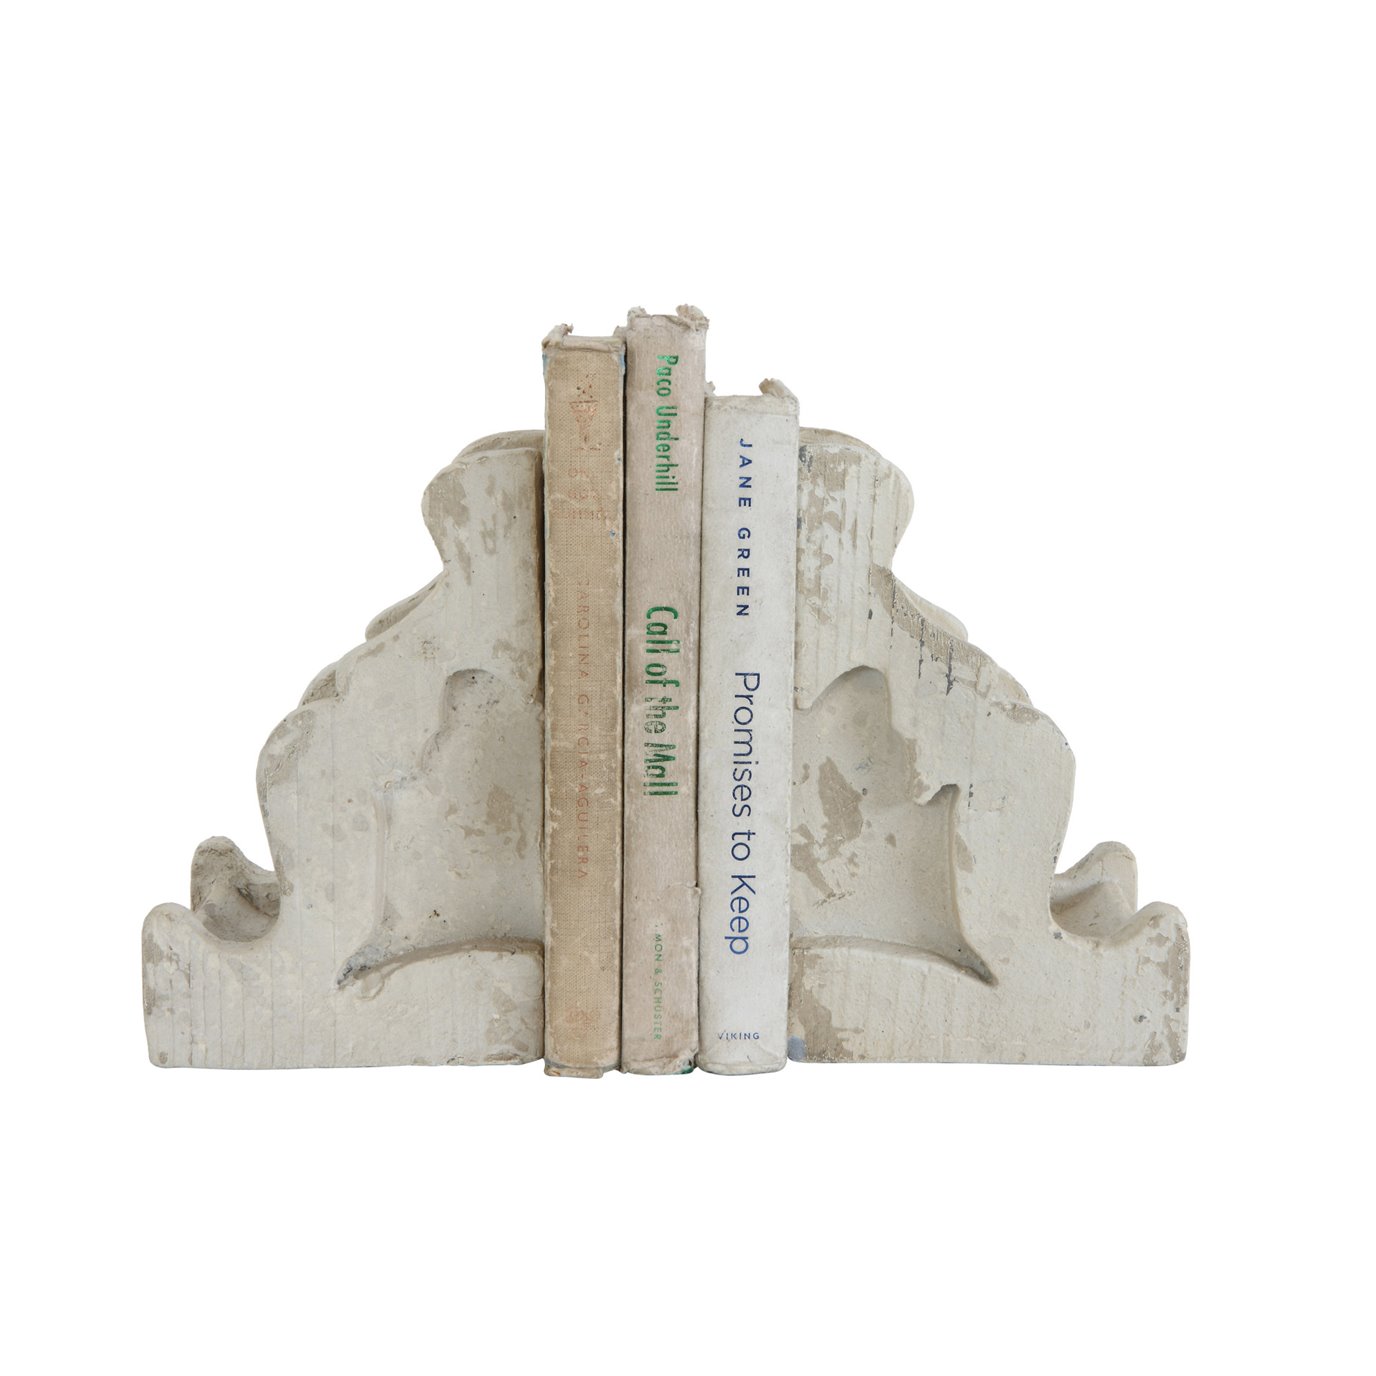 Distressed White Corbel Shaped Bookends (Set of 2 Pieces)